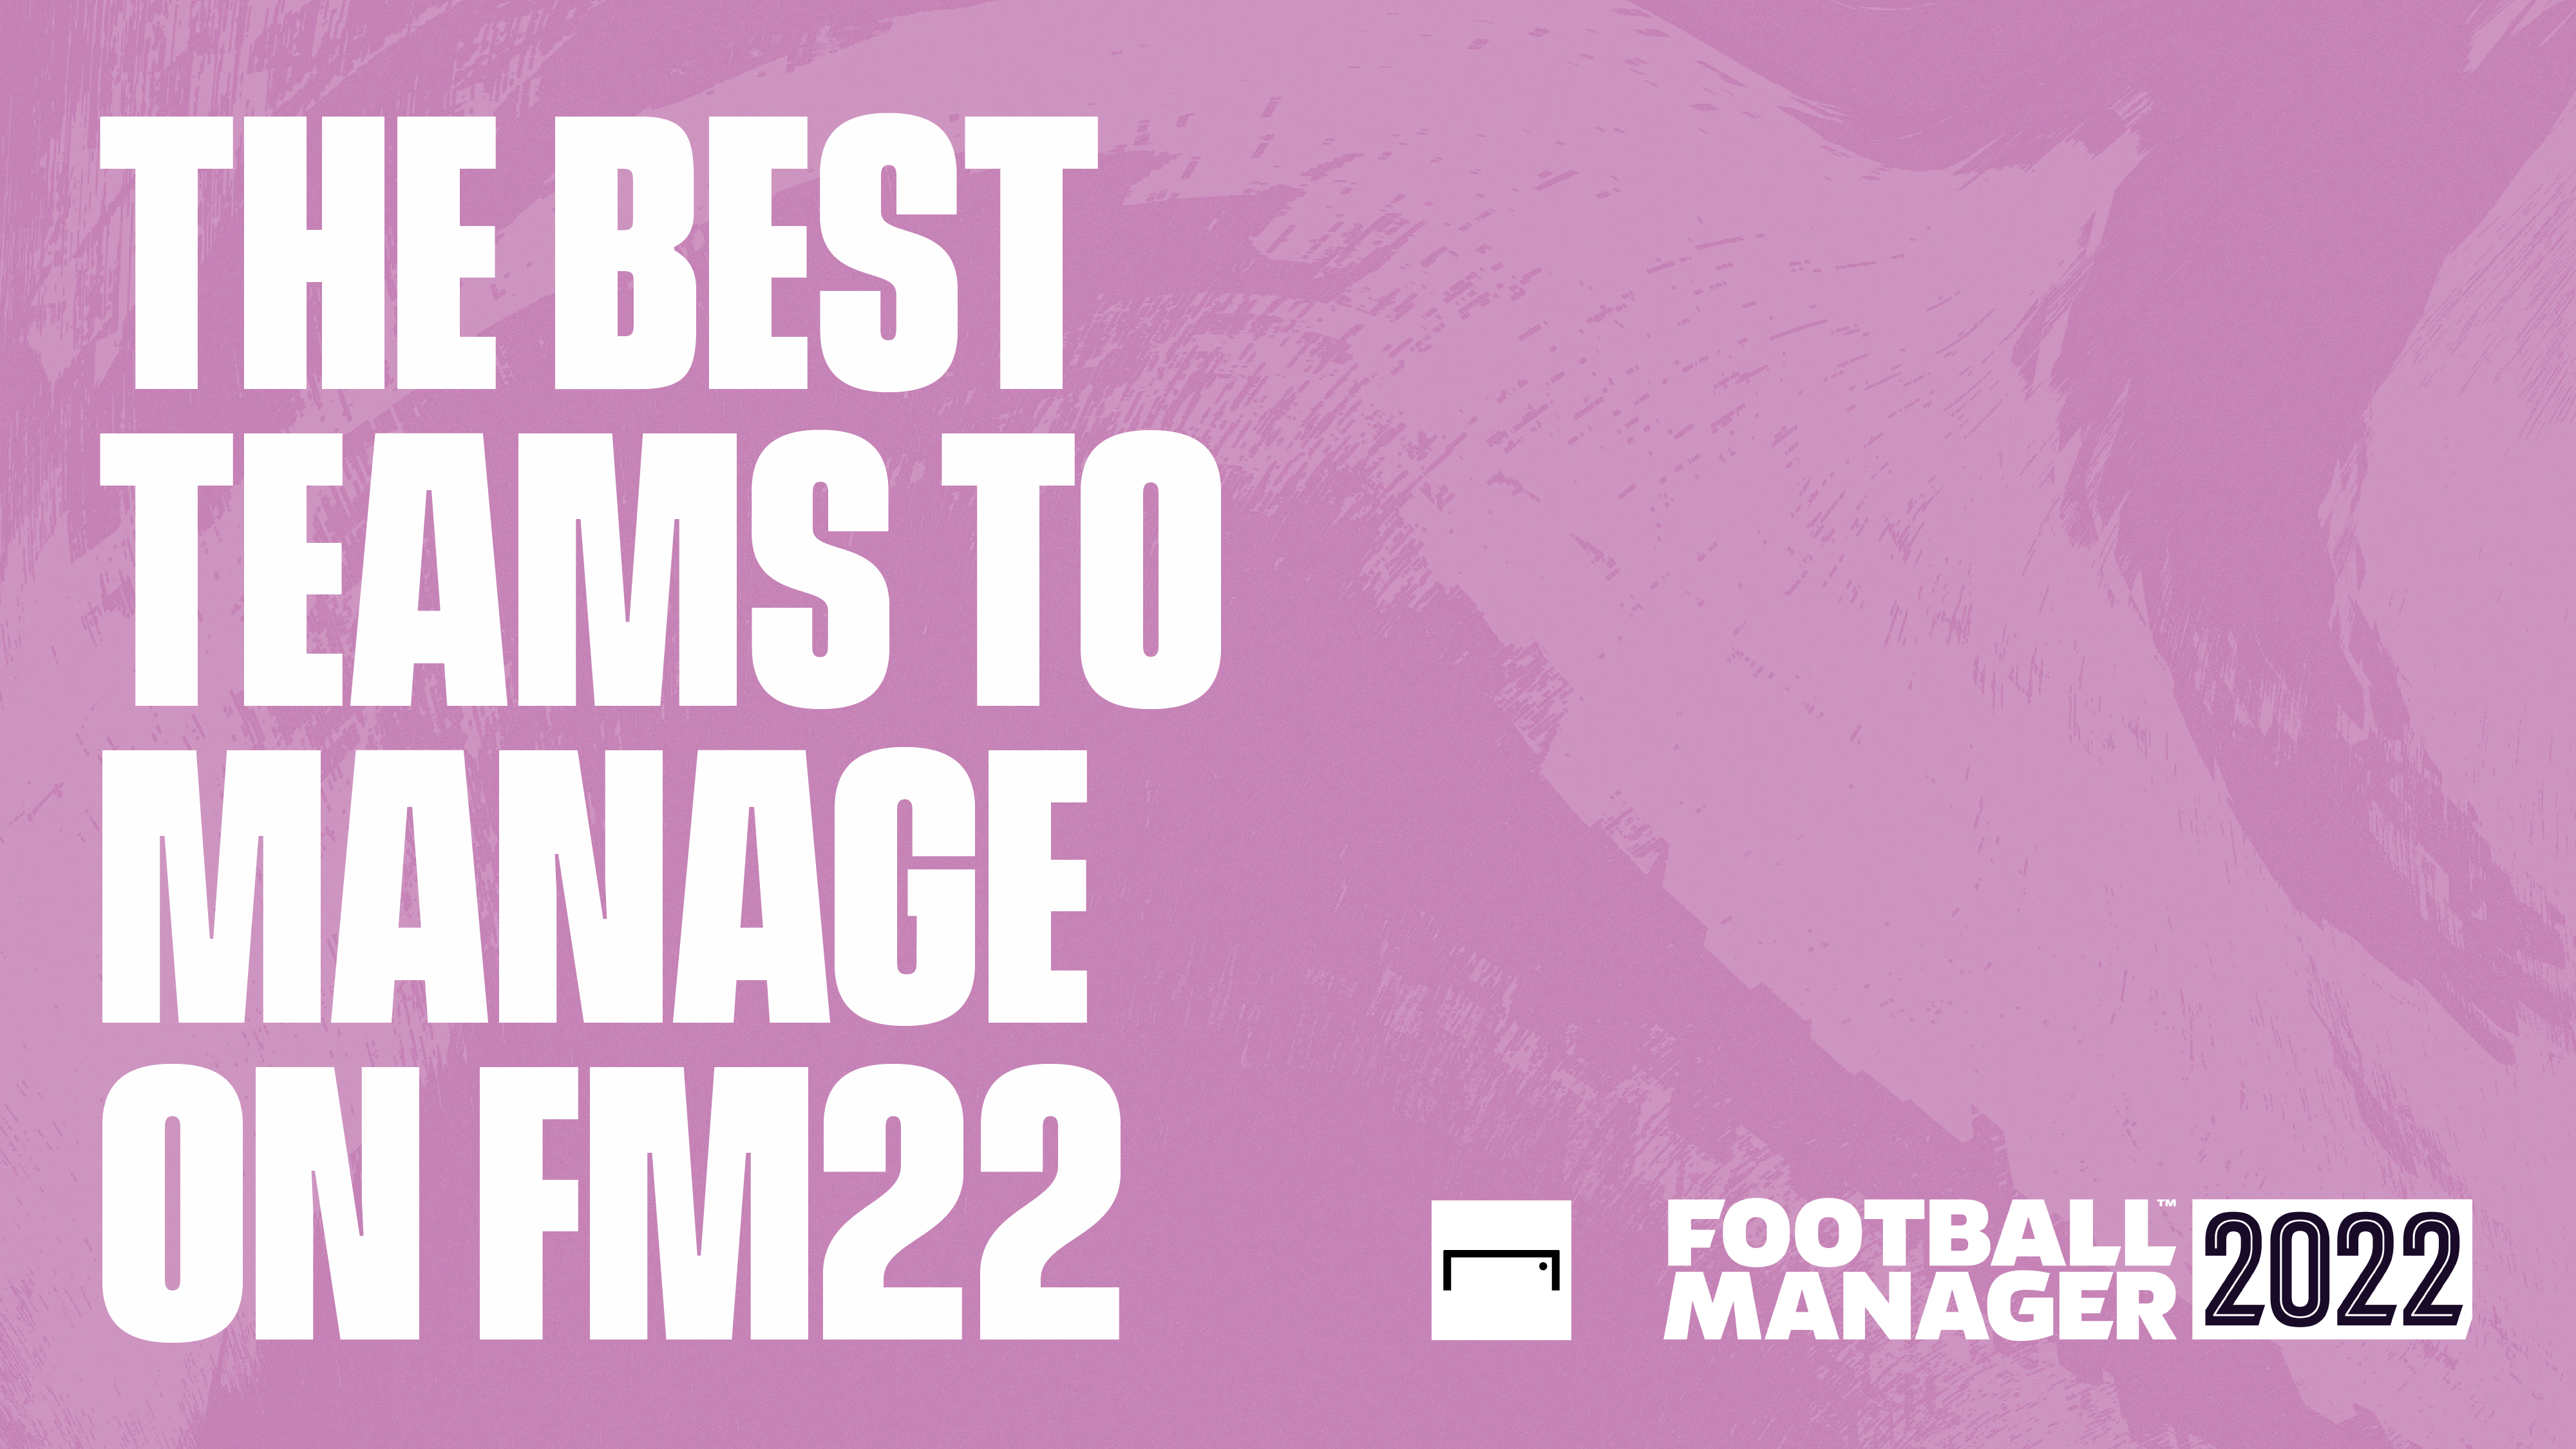 Football Manager 2022 Mobile: Final Content Update Available NOW